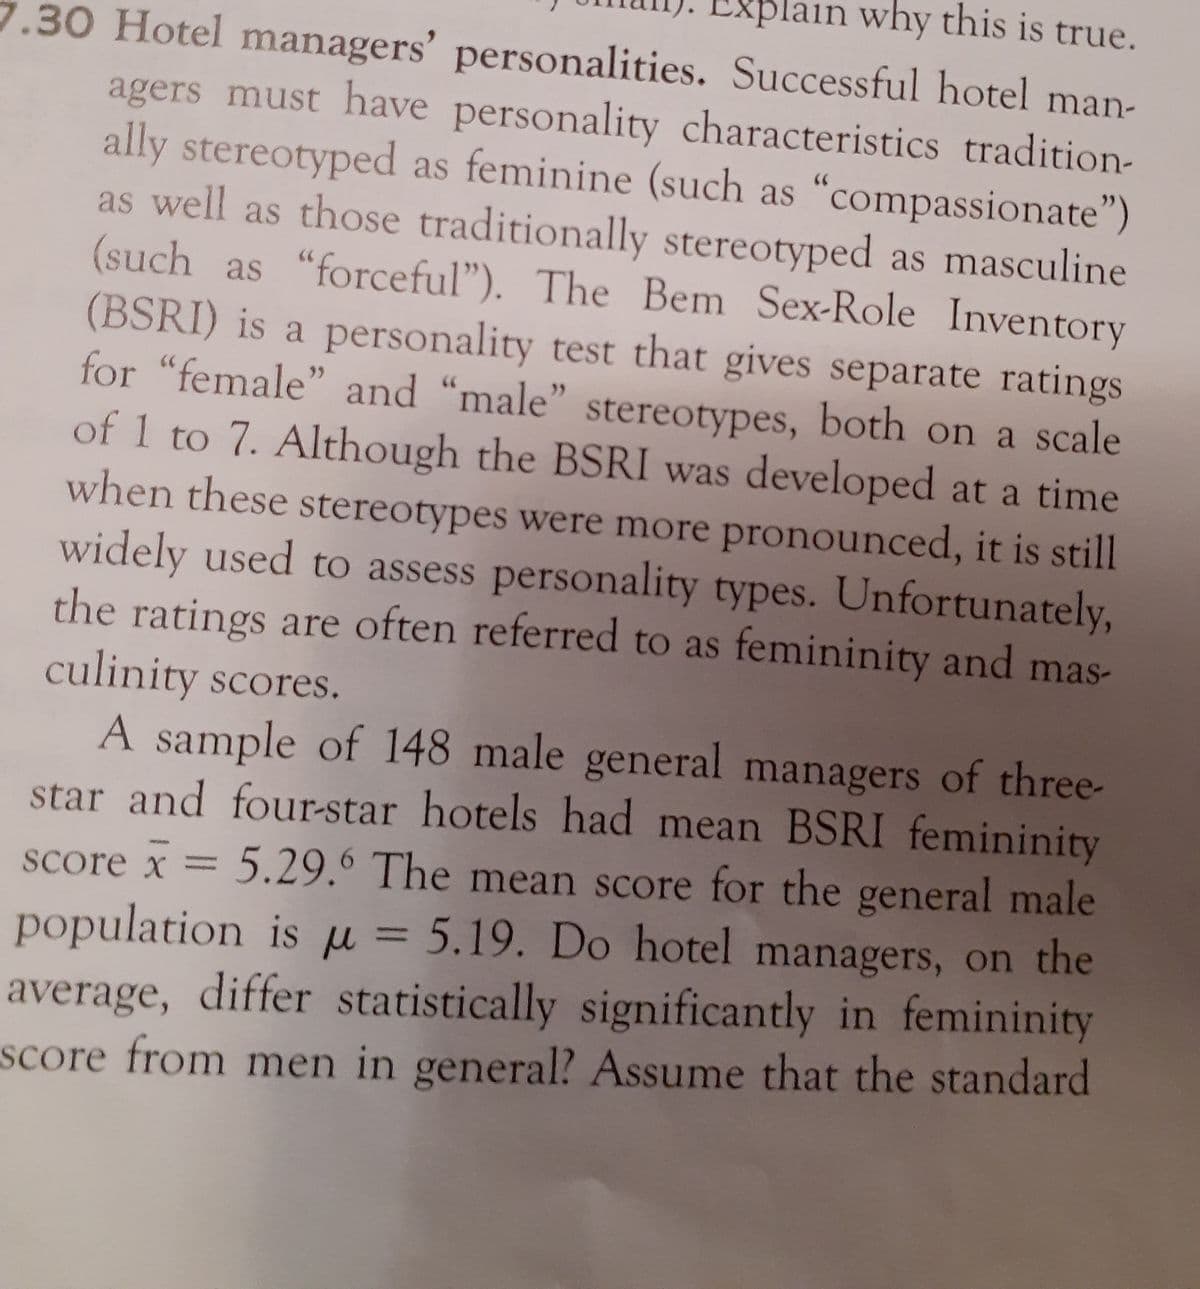 Explain why this is true.
7.30 Hotel managers' personalities. Successful hotel man-
agers must have personality characteristics tradition-
ally stereotyped as feminine (such as "compassionate")
as well as those traditionally stereotyped as masculine
(such as "forceful"). The Bem Sex-Role Inventory
(BSRI) is a personality test that gives separate ratings
for "female" and "male" stereotypes, both on a scale
of 1 to 7. Although the BSRI was developed at a time
>>
when these stereotypes were more pronounced, it is still
widely used to assess personality types. Unfortunately,
the ratings are often referred to as femininity and mas-
culinity scores.
A sample of 148 male general managers of three-
star and four-star hotels had mean BSRI femininity
score x = 5.29.6 The mean score for the general male
population is u = 5.19. Do hotel managers, on the
average, differ statistically significantly in femininity
score from men in general? Assume that the standard
